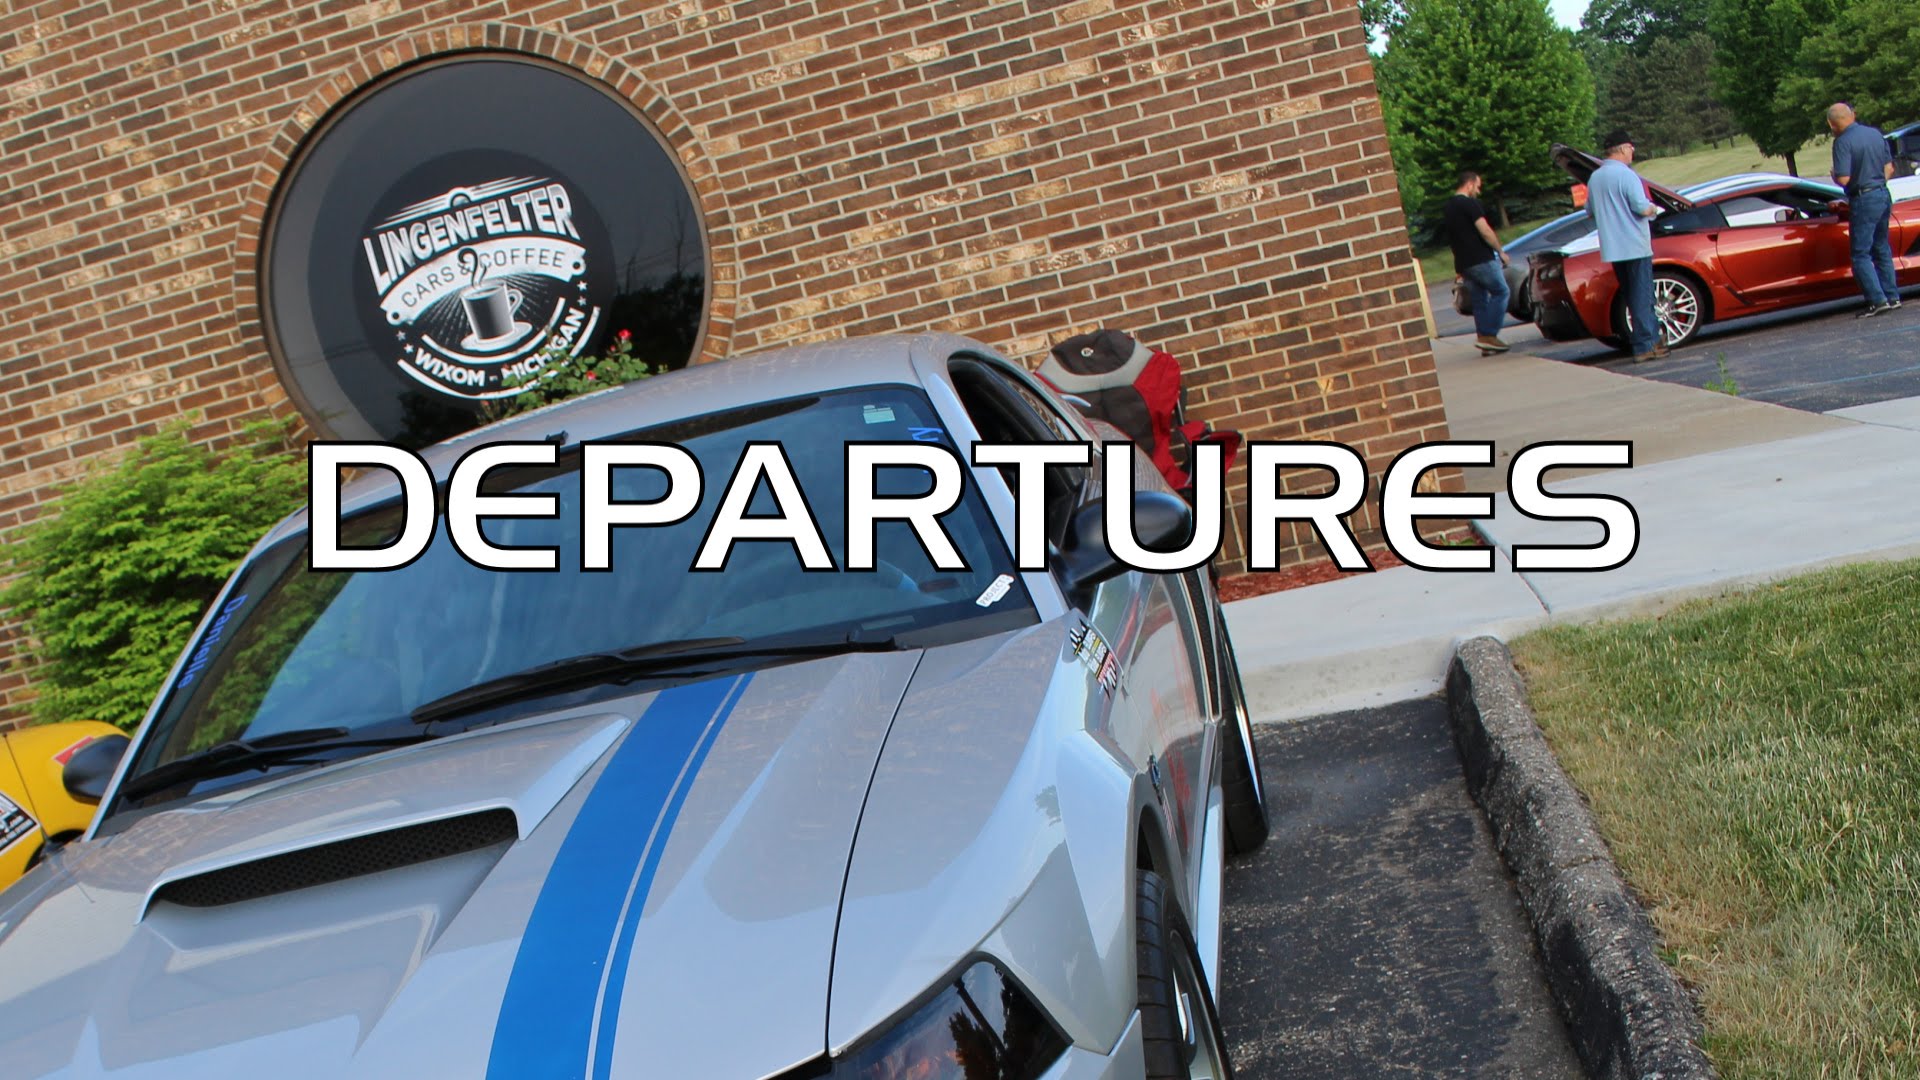 Lingenfelter Cars and Coffee – The Departures 6/4/2016